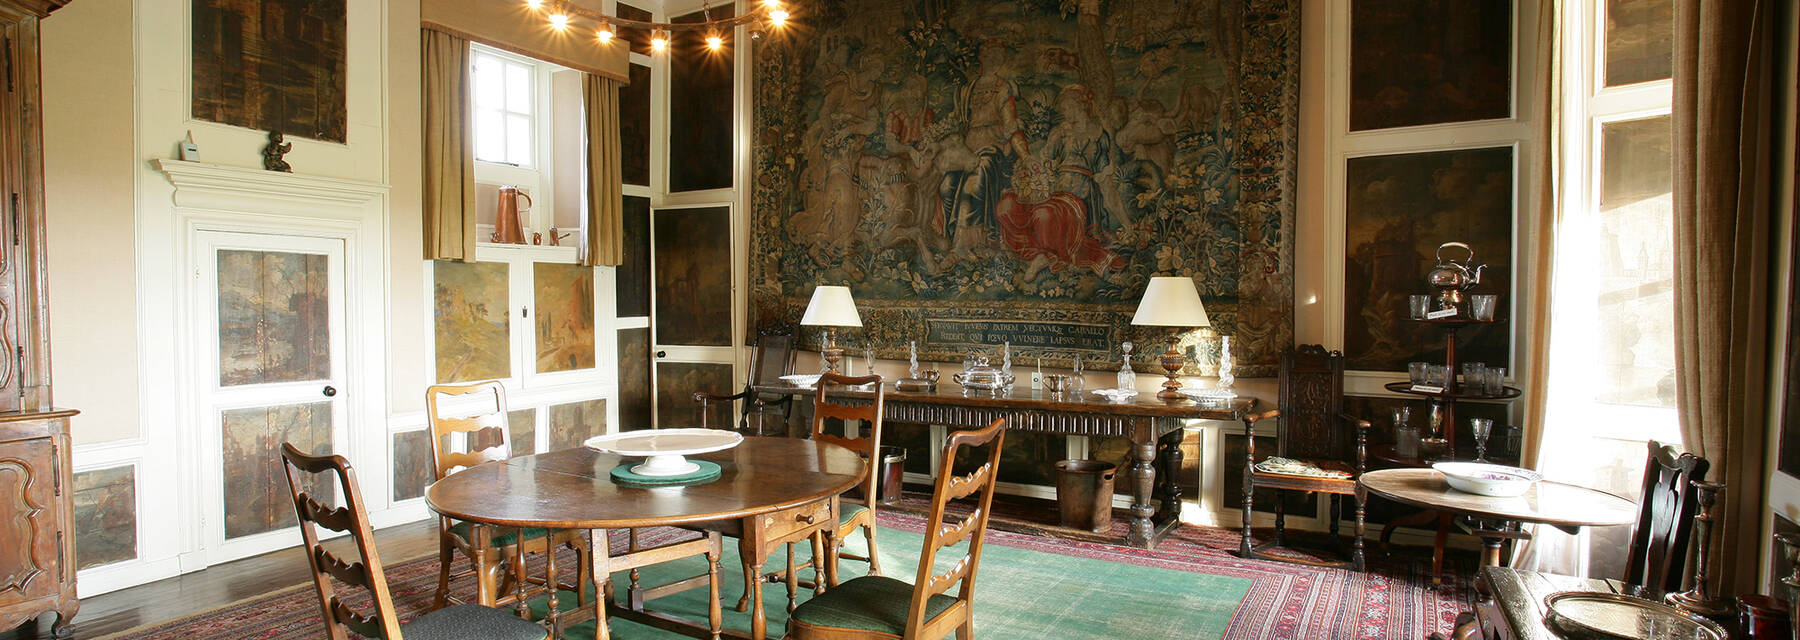 Kellie Castle dining room with wall tapestry and paintings